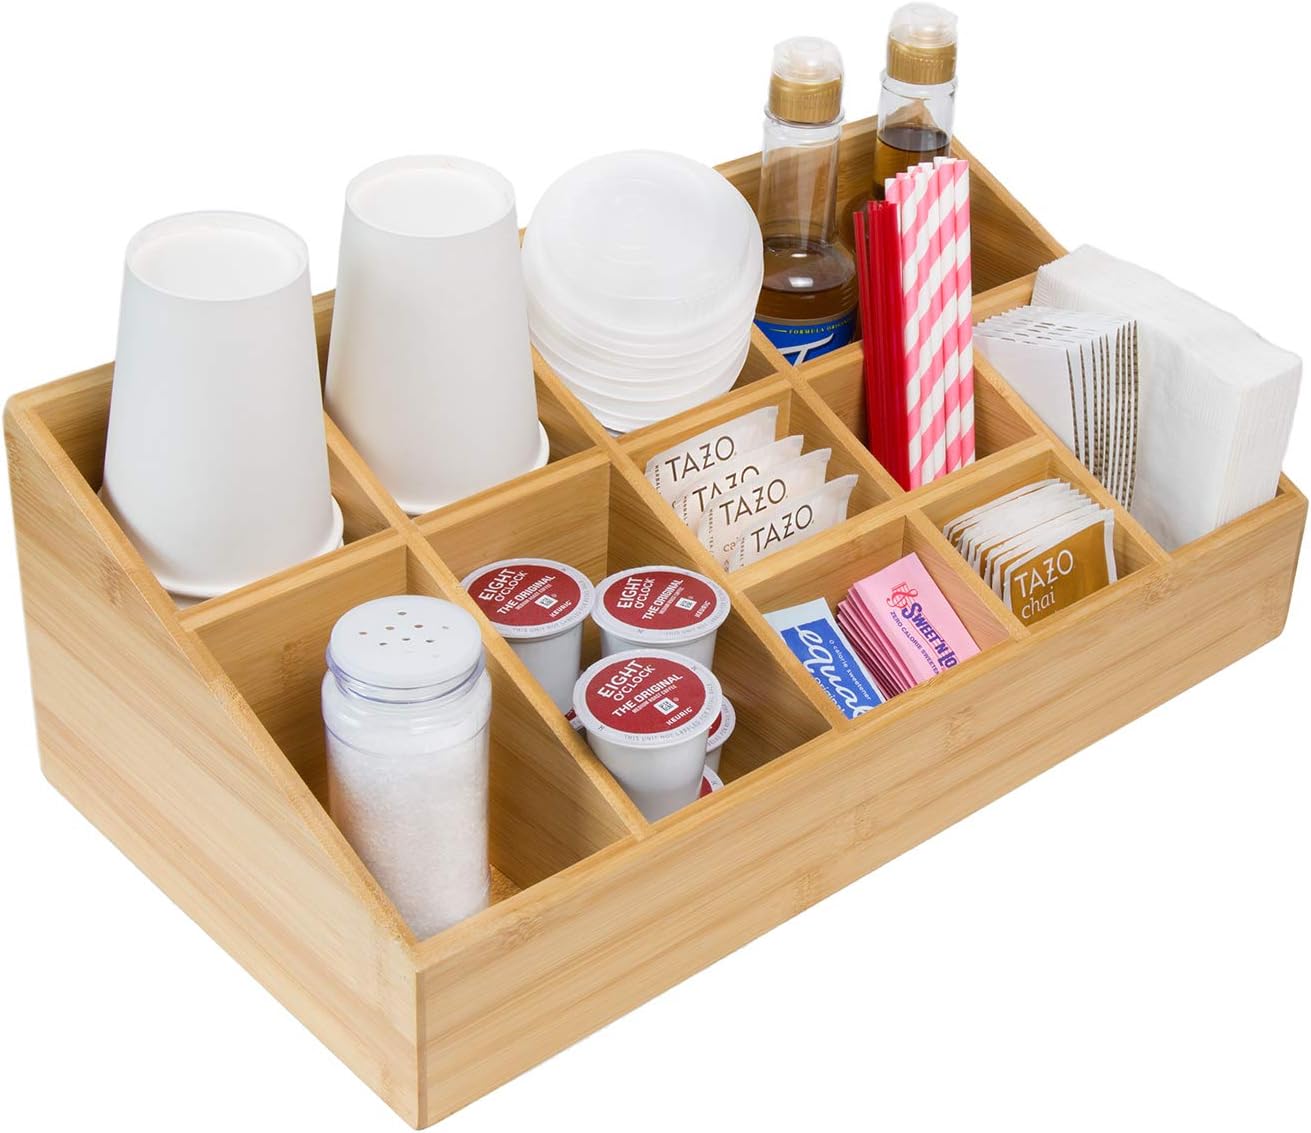 Need Better Organization Of Your Condiments For Your Coffee Station: This 2 Part Coffee Condiment Organizer Guide Will Transform Your Counter